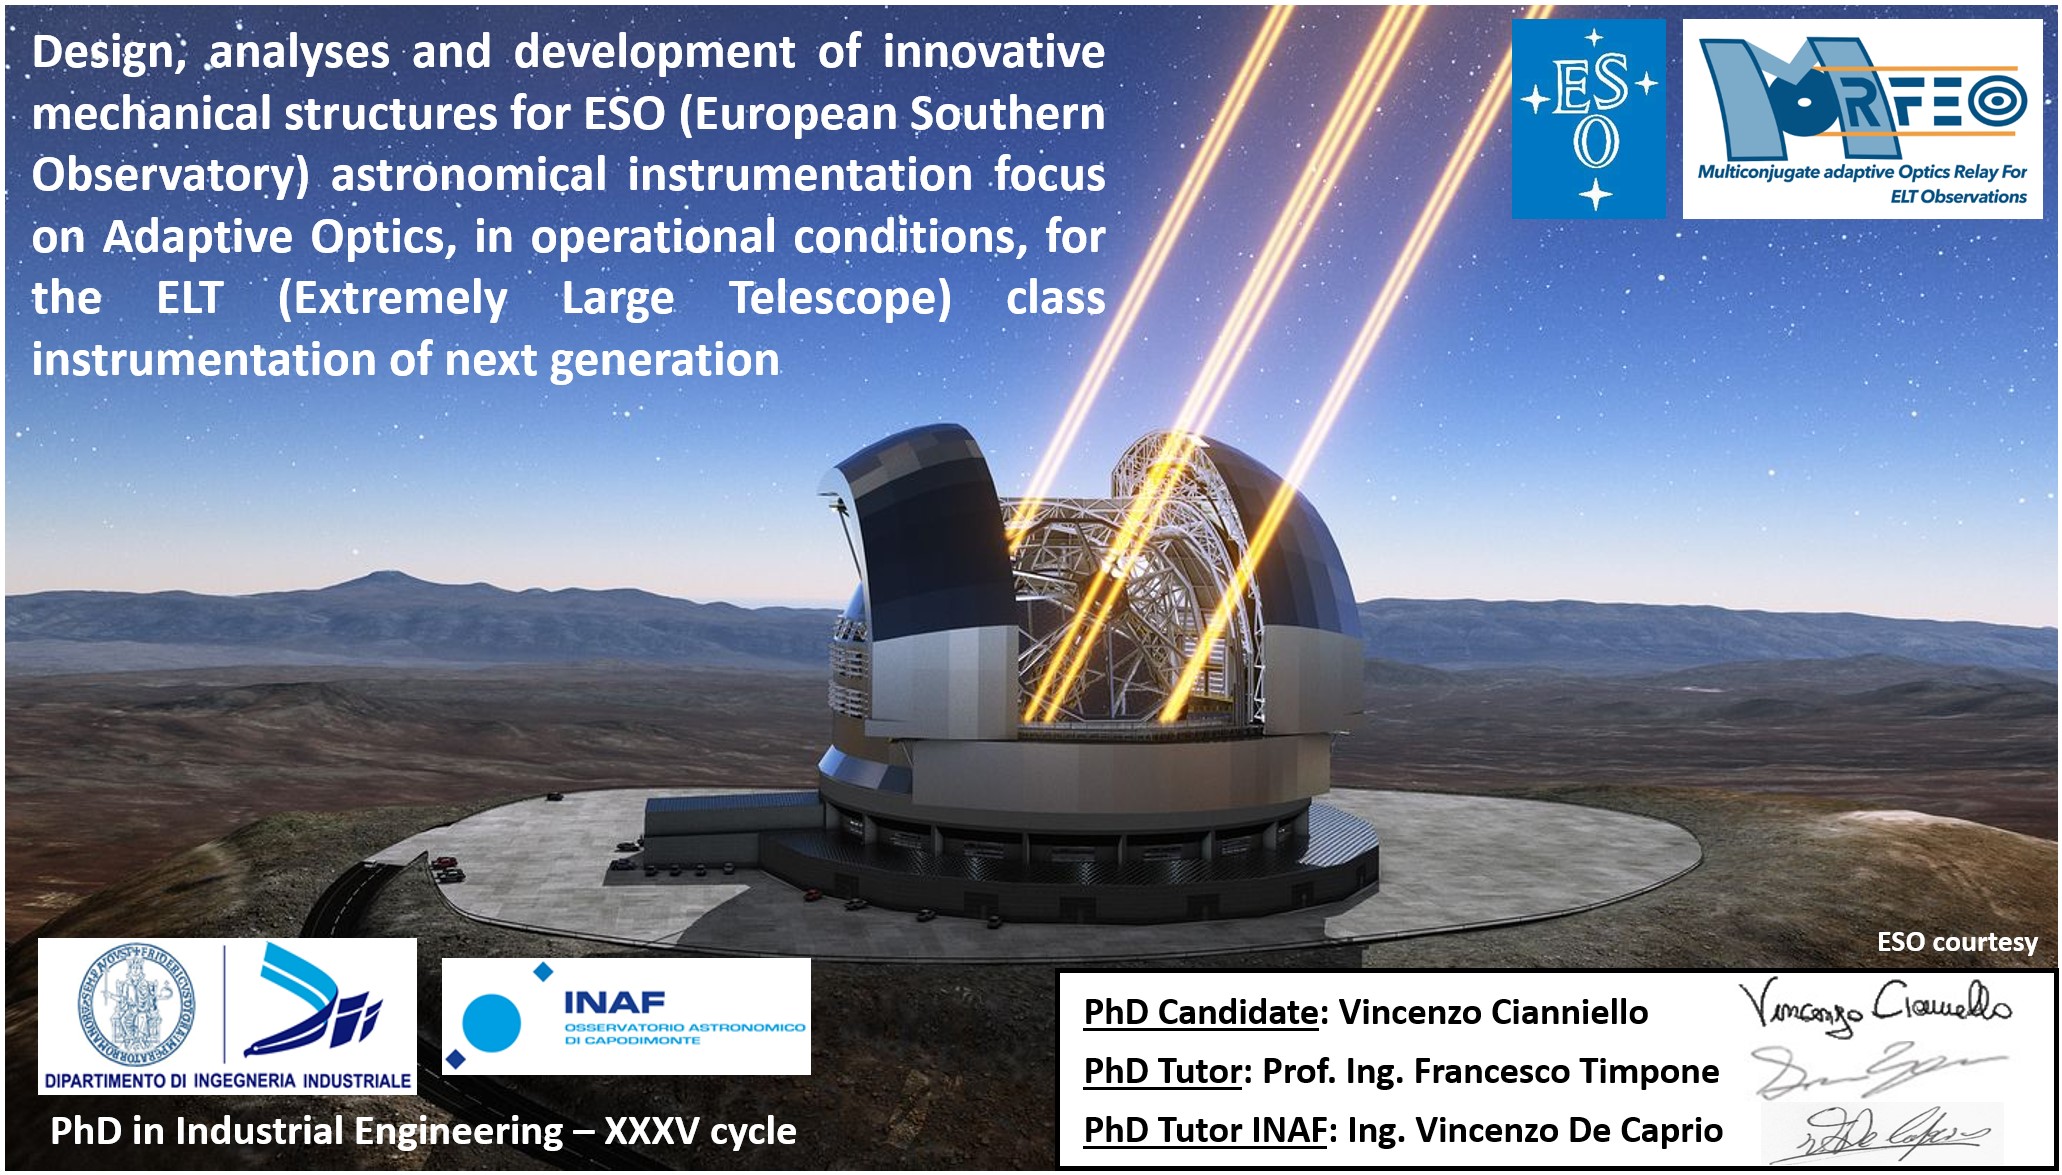 Design, analyses and development of innovative mechanical structures for ESO (European Southern Observatory) astronomical instrumentation focus on Adaptive Optics, in operational conditions, for the ELT (Extremely Large Telescope) class instrumentation of next generation